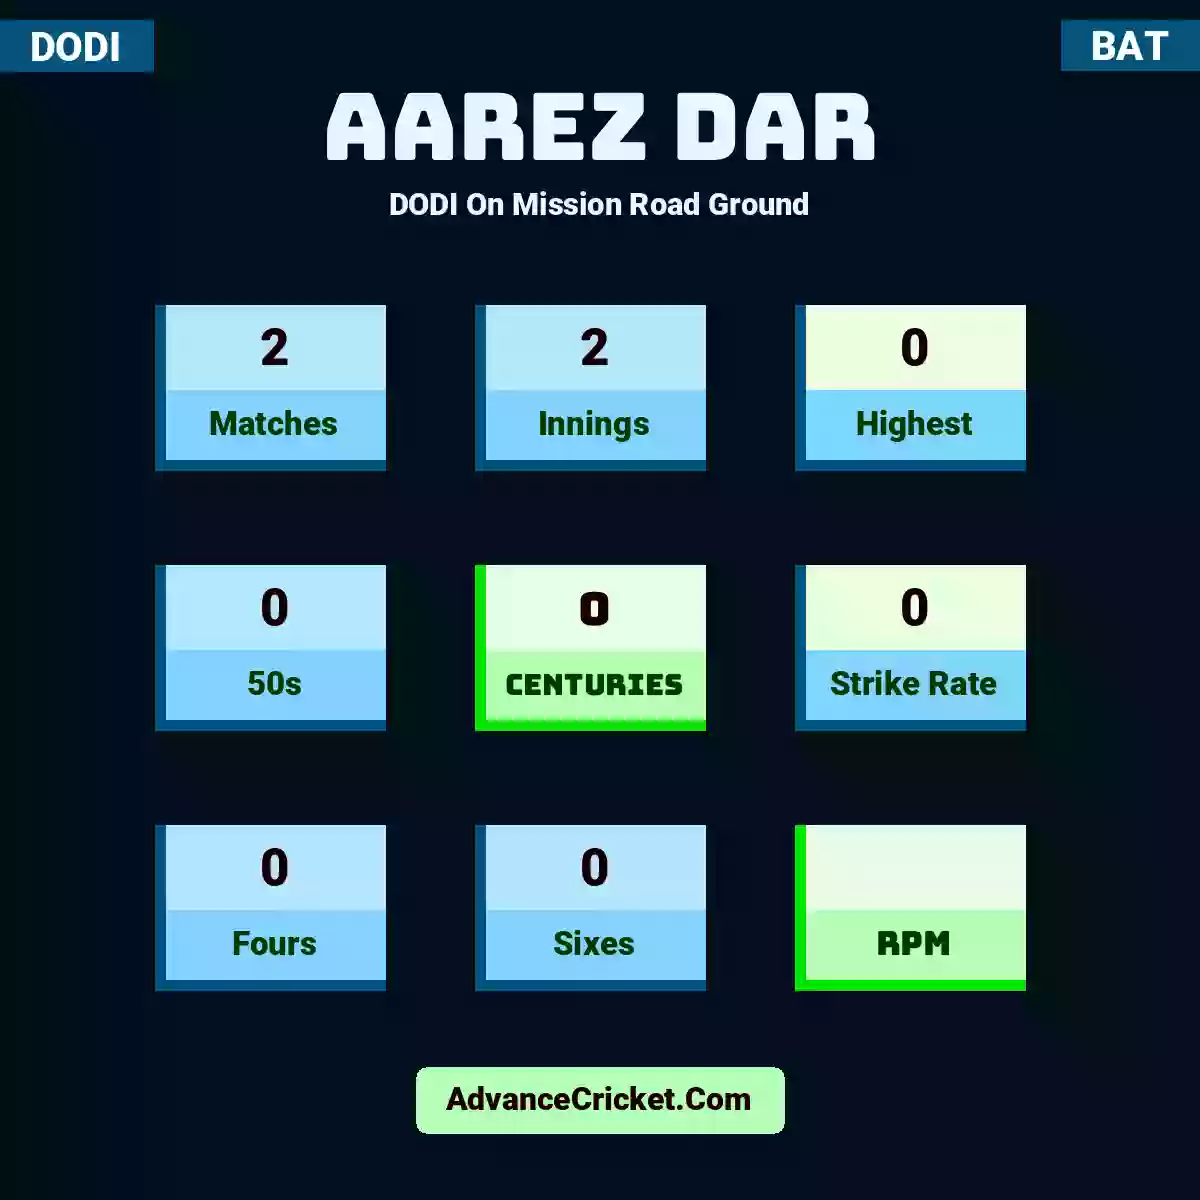 Aarez Dar DODI  On Mission Road Ground, Aarez Dar played 2 matches, scored 0 runs as highest, 0 half-centuries, and 0 centuries, with a strike rate of 0. A.Dar hit 0 fours and 0 sixes.